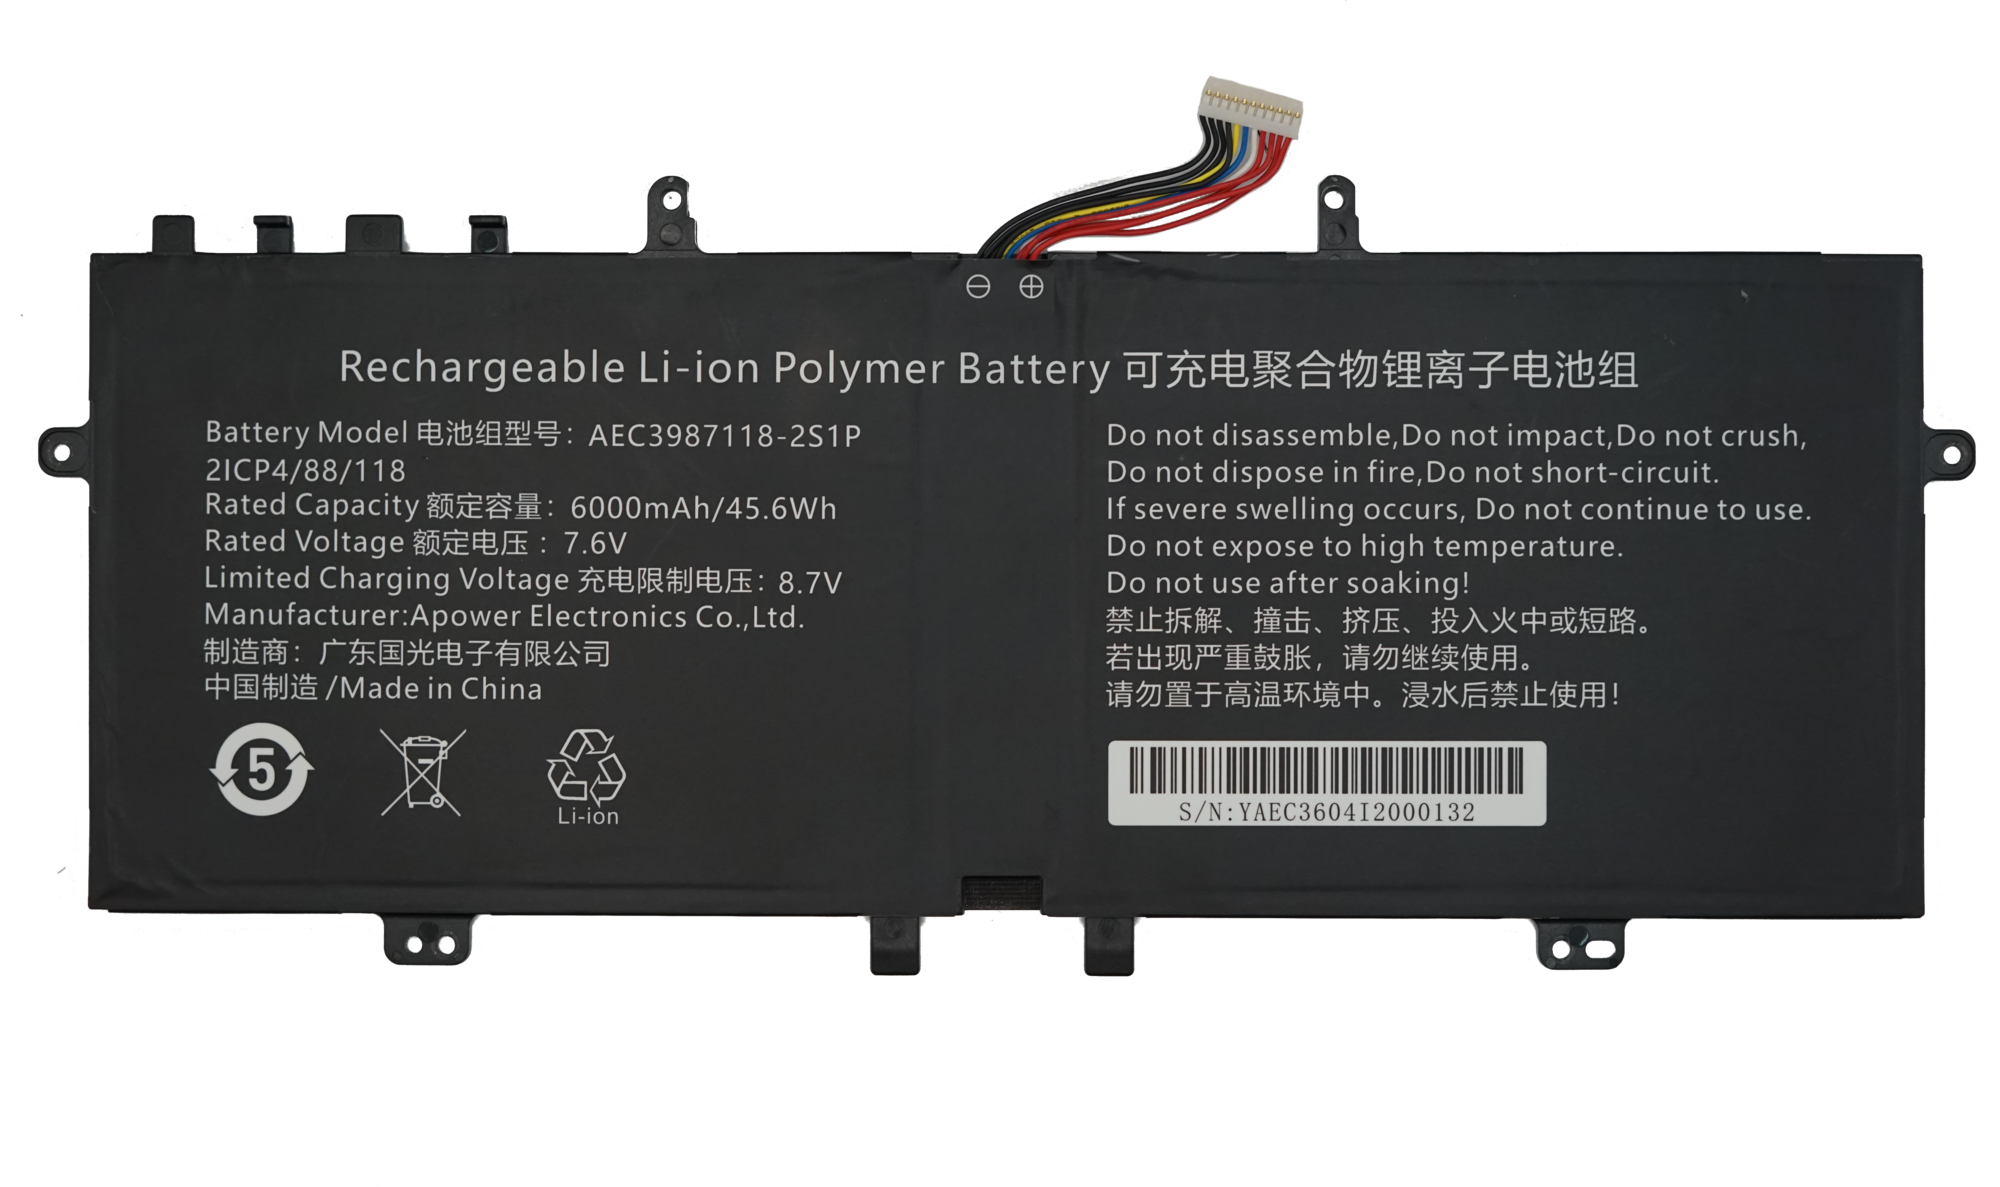 Battery - 45.6Wh